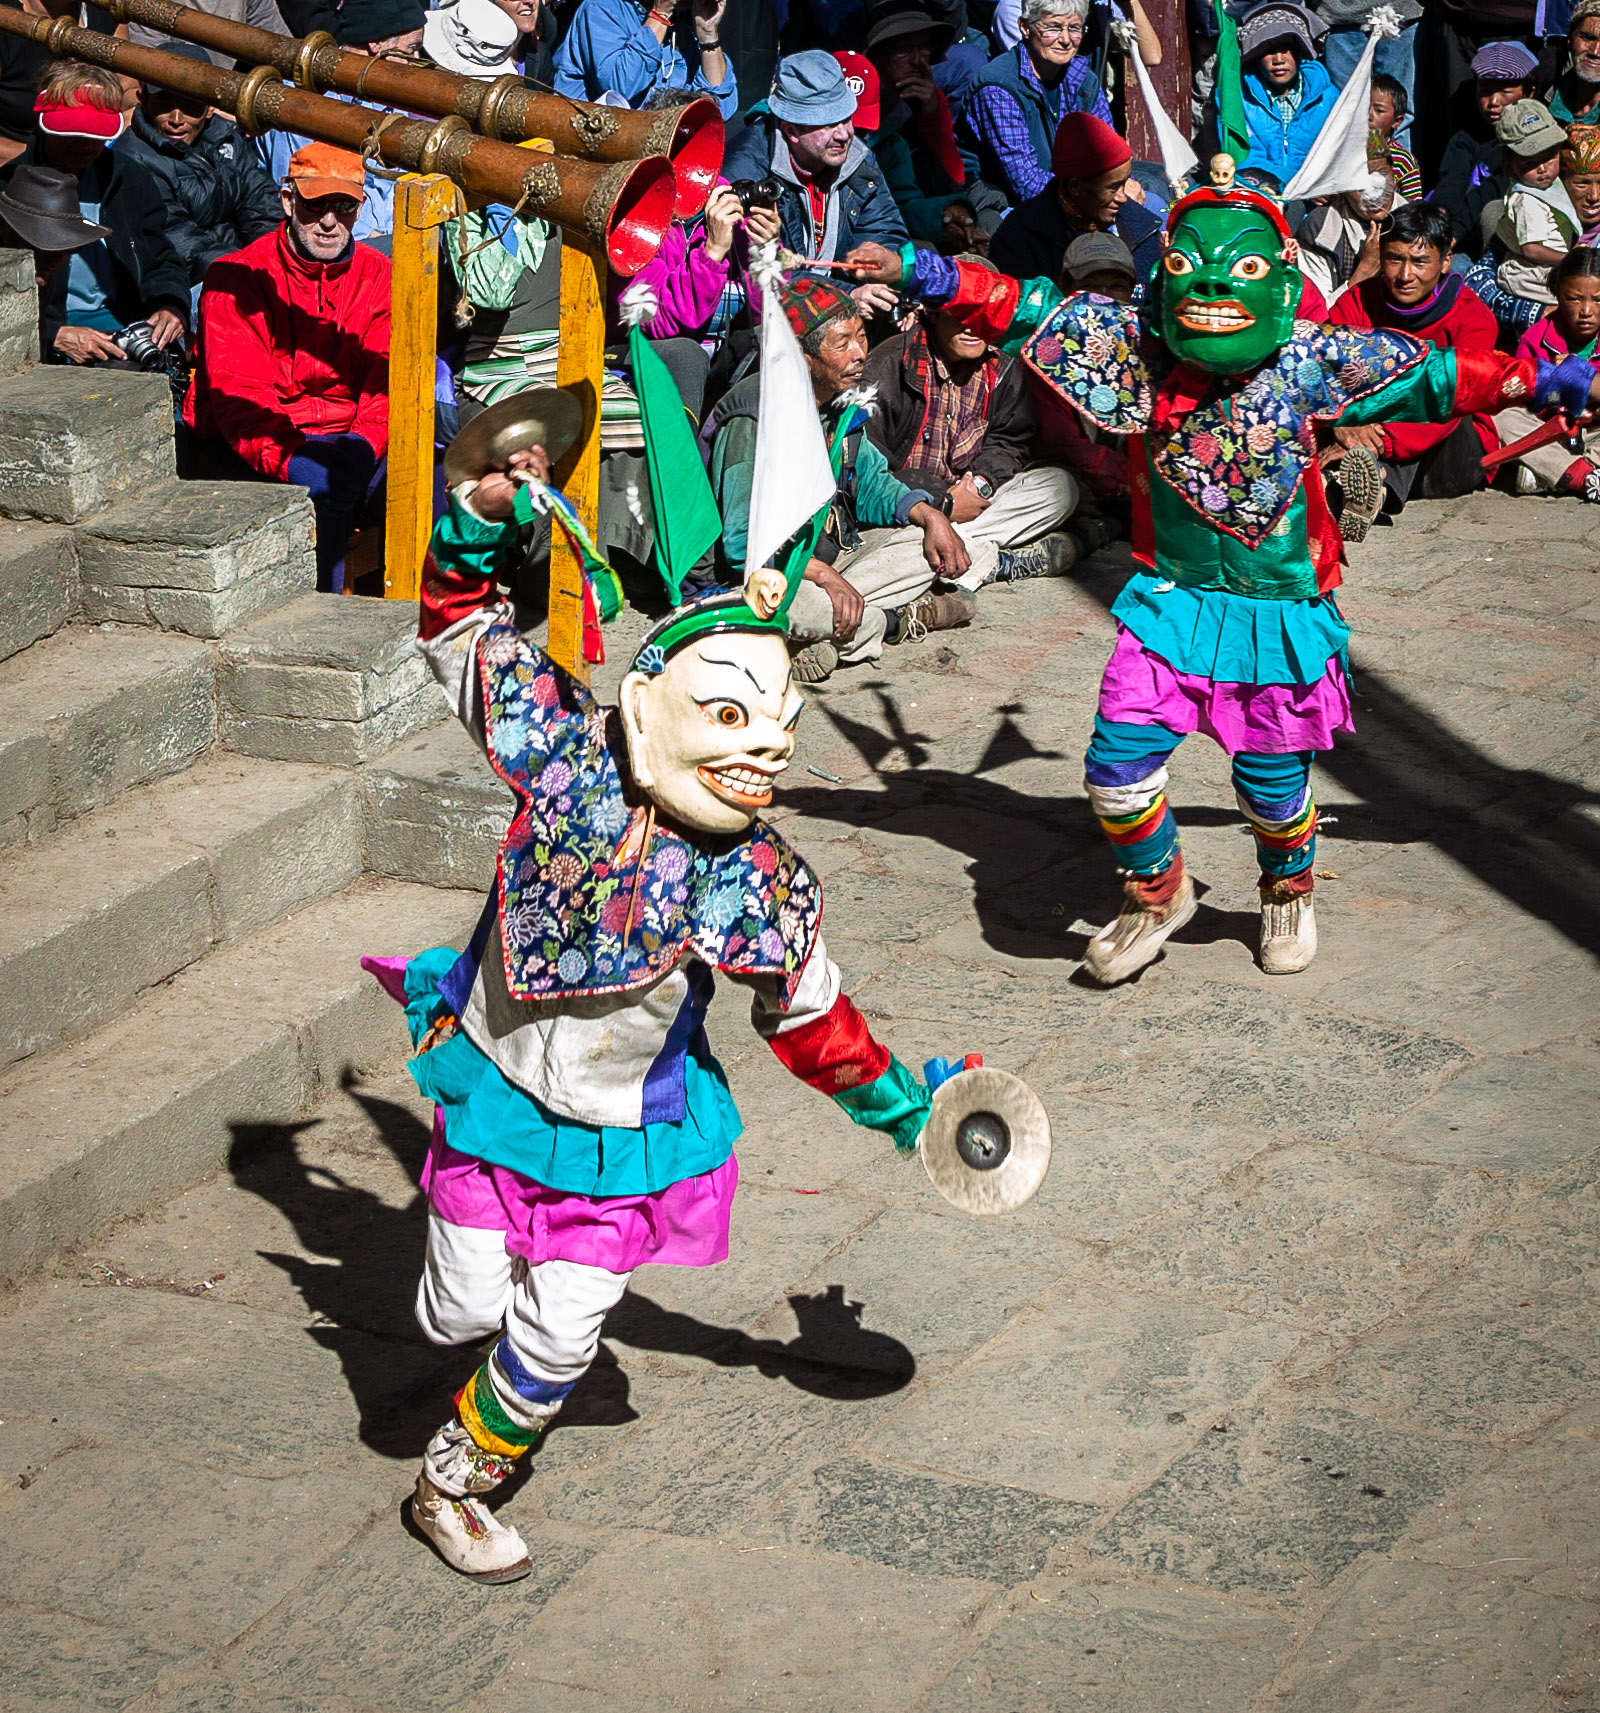 Second day's Dance of the Masks